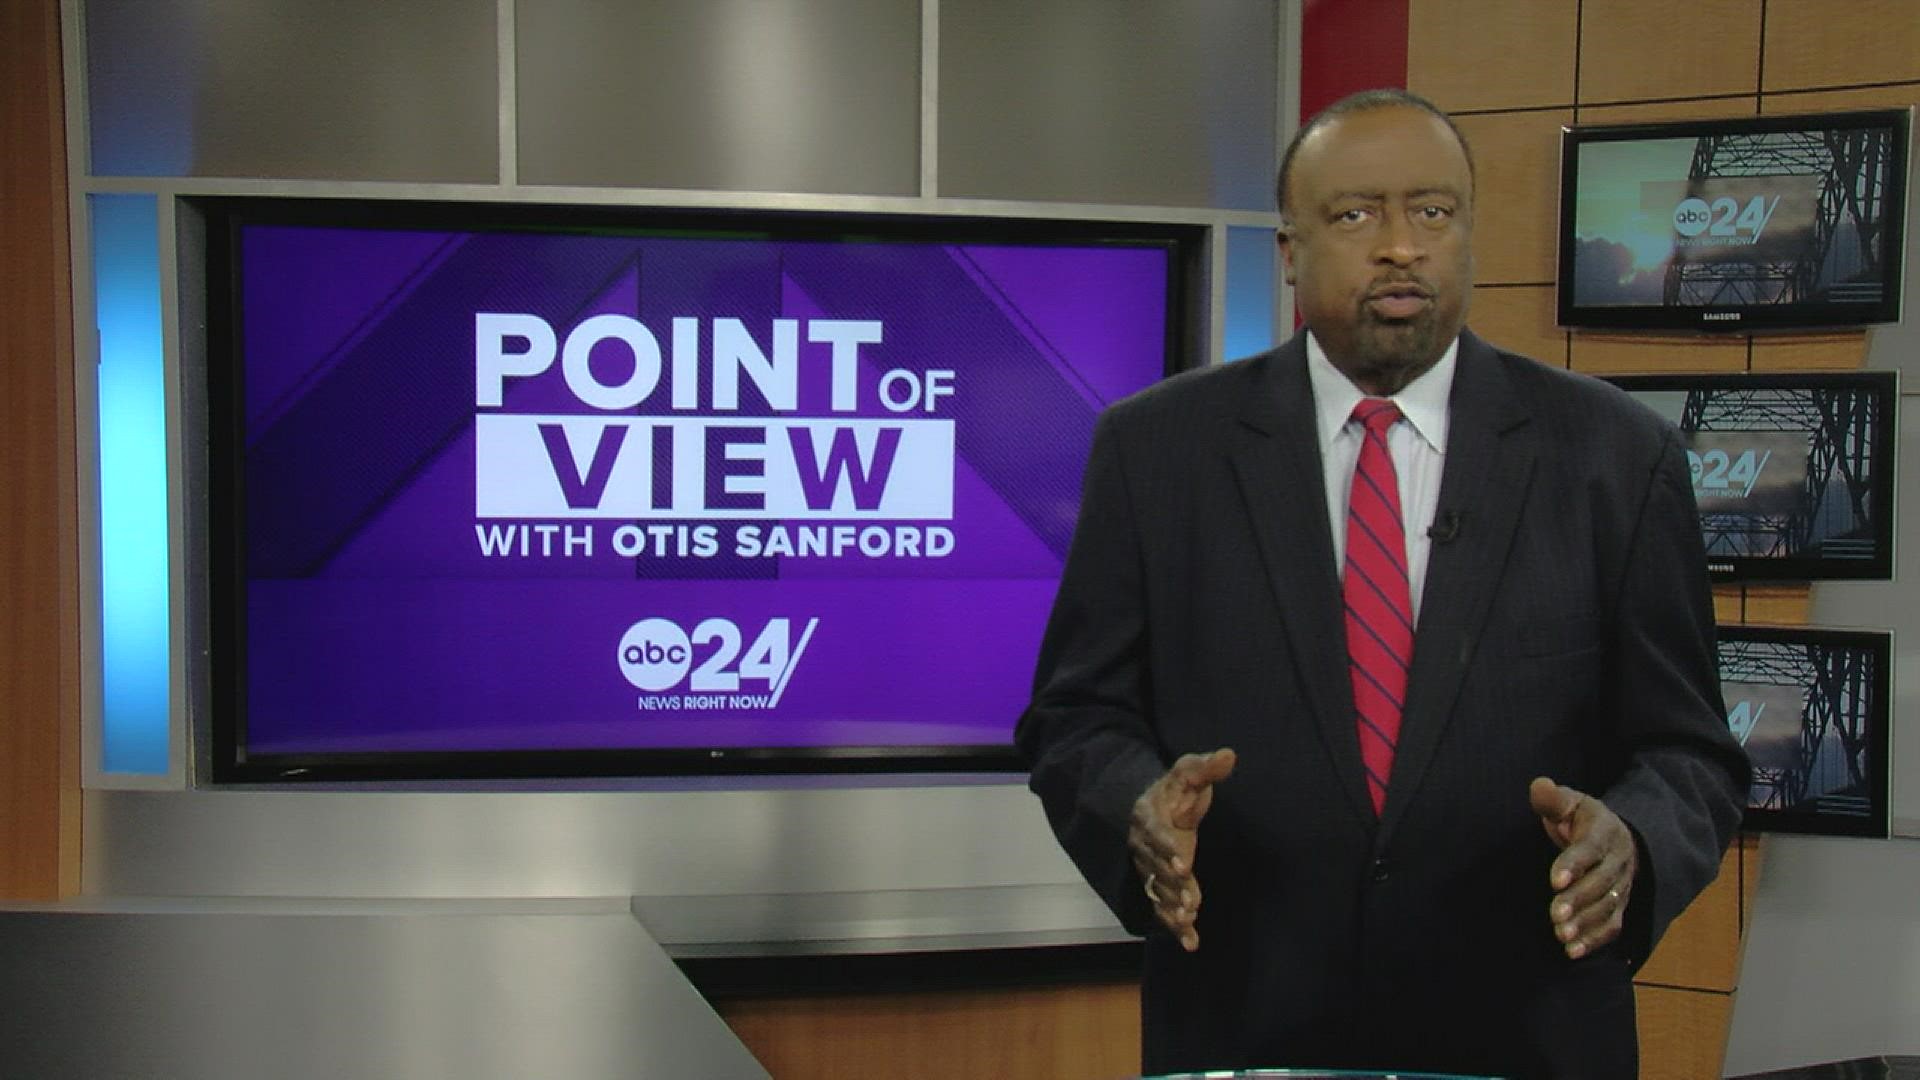 ABC24 political analyst and commentator Otis Sanford shared his point of view on the Jan. 6 hearings on the Capitol insurrection.